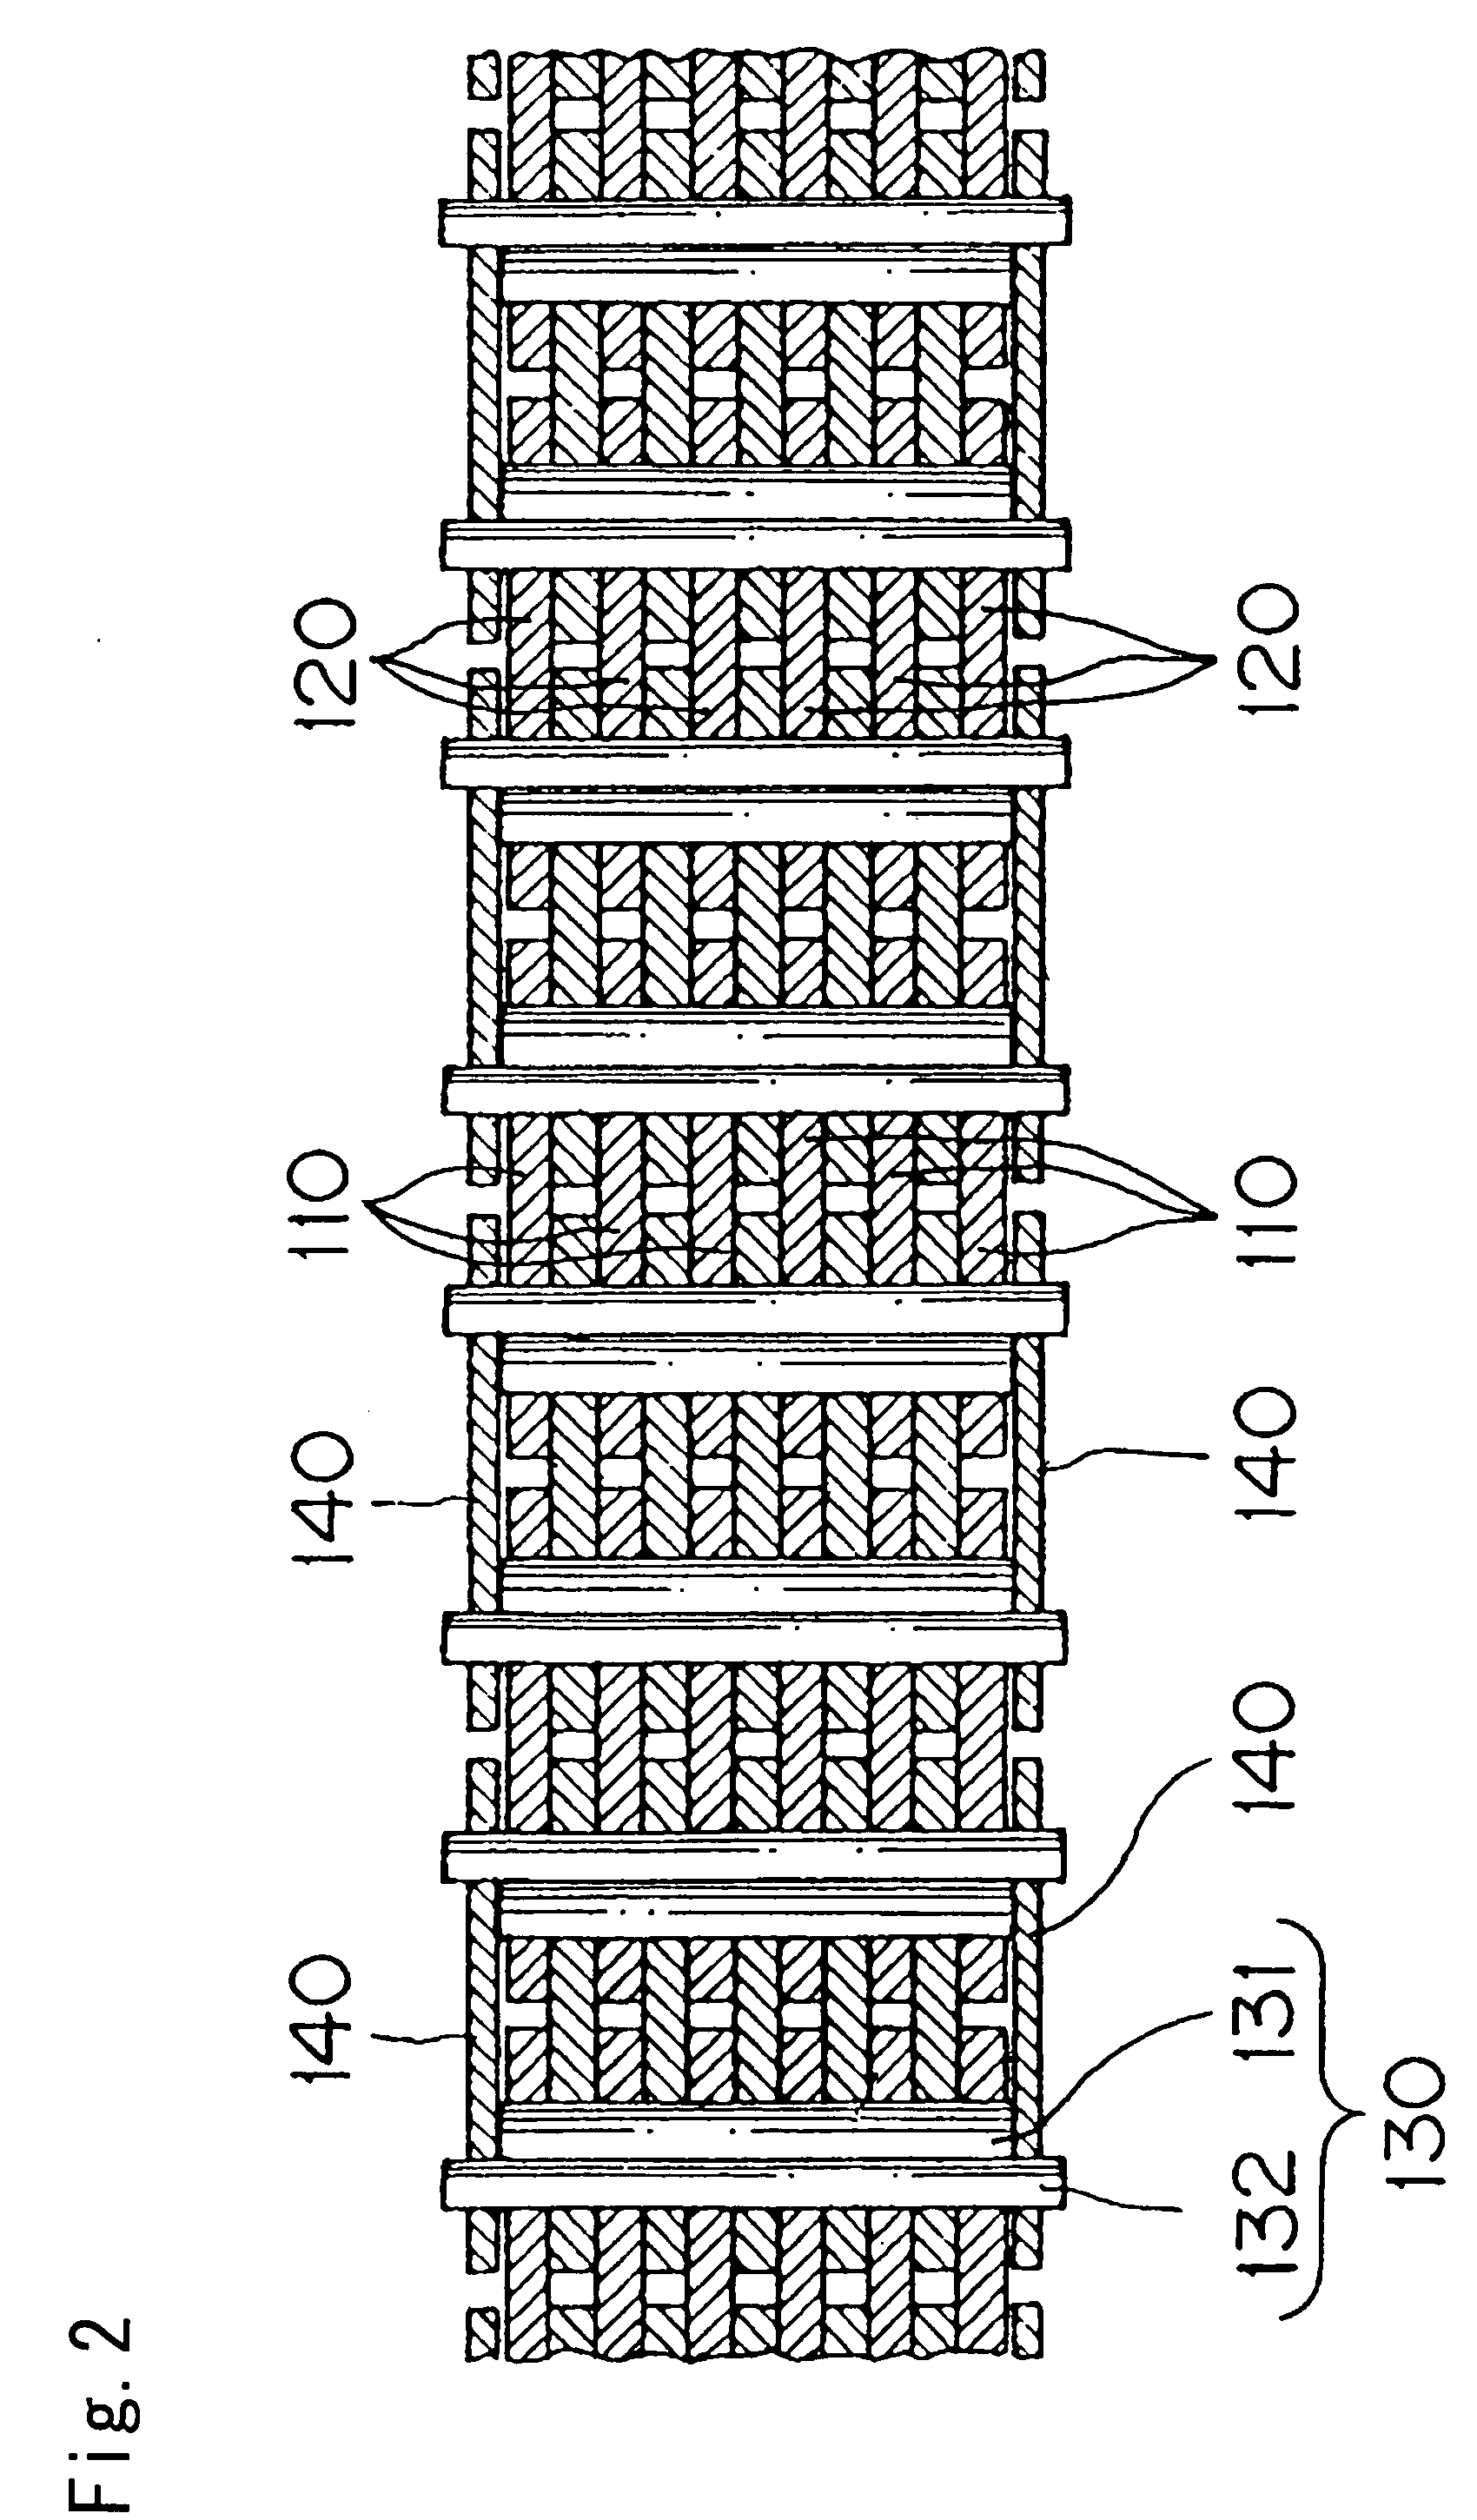 Silent chain transmission device